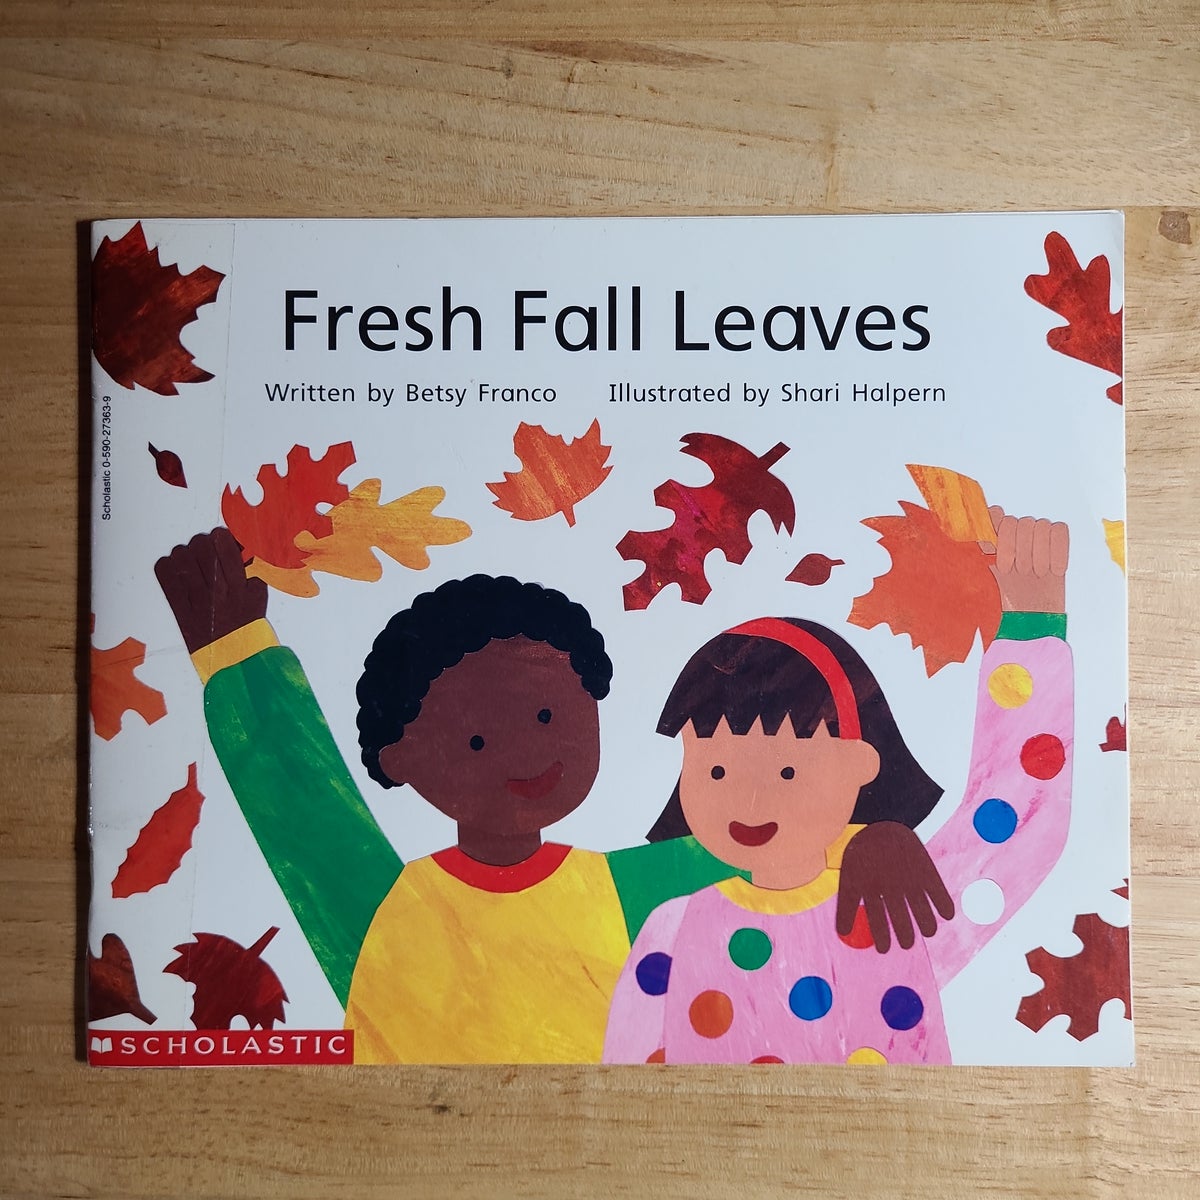 A Pretty Fall Leaf with Dewdrops // Sketchbook Sunday – The Frugal